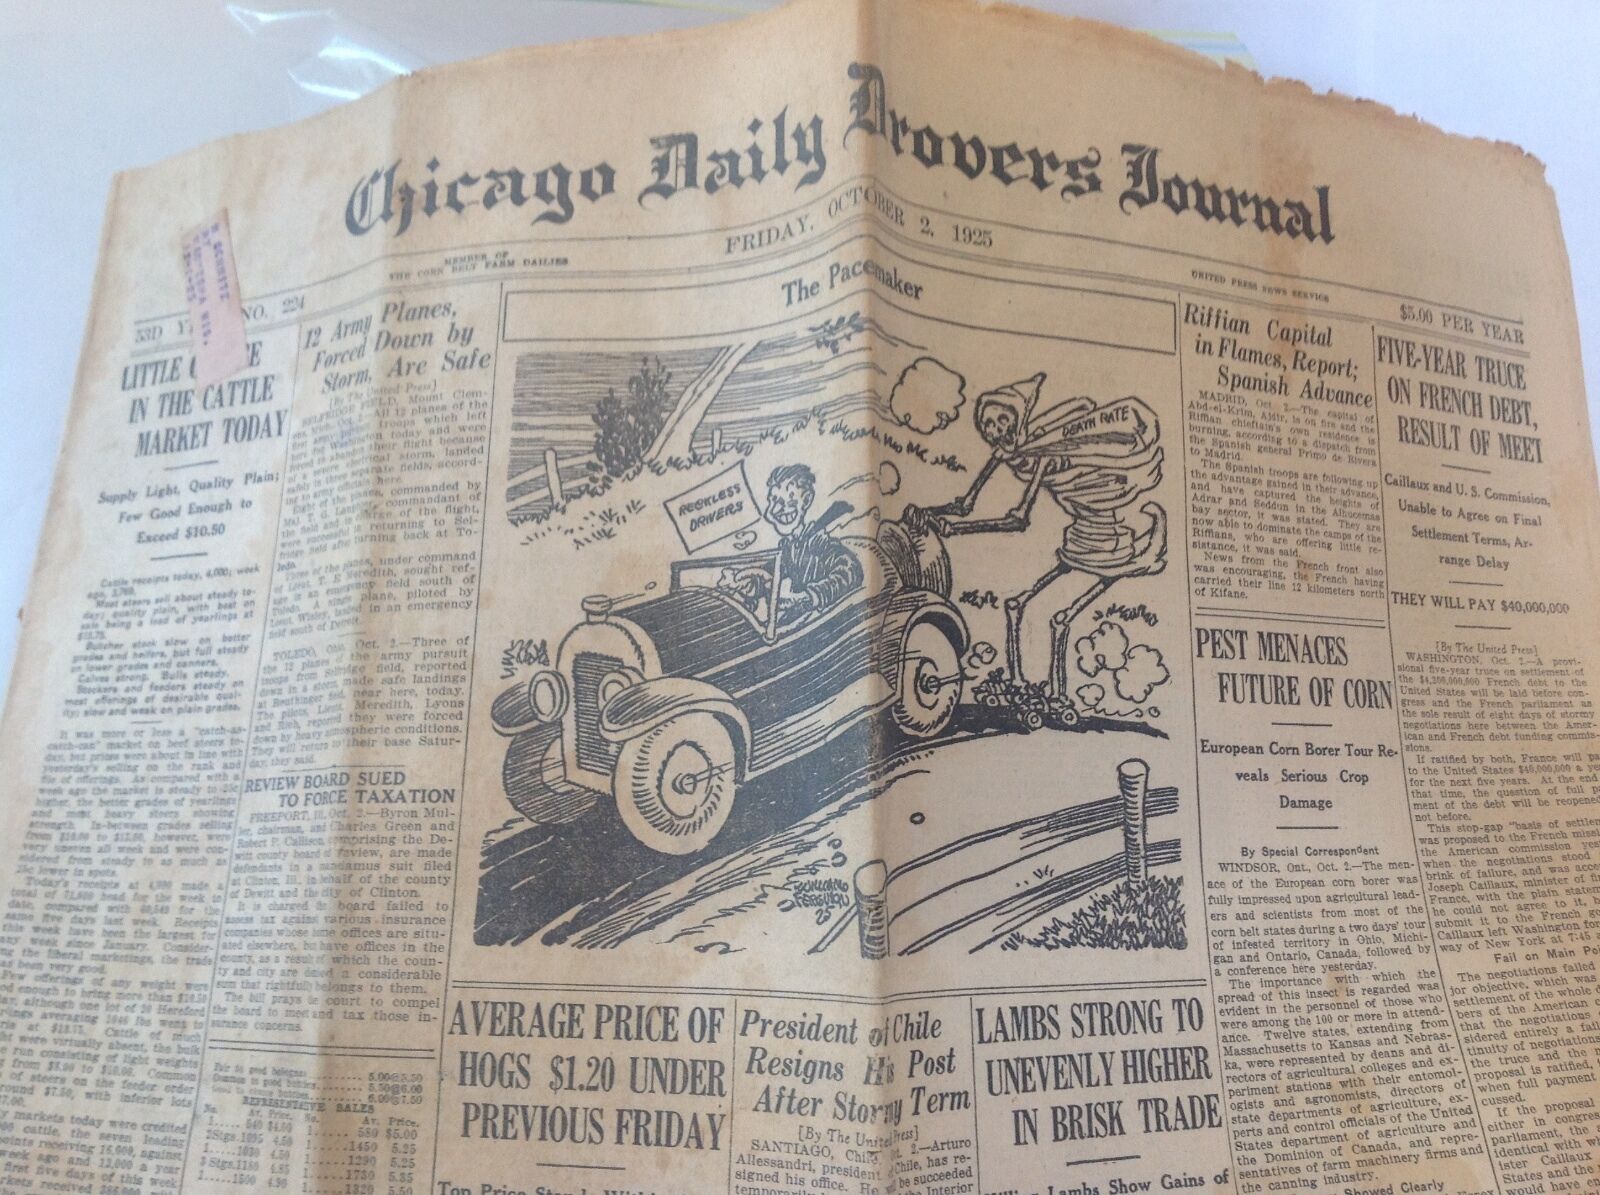 1925 Chicago Daily Drovers Journal Newspaper October 2, 1925